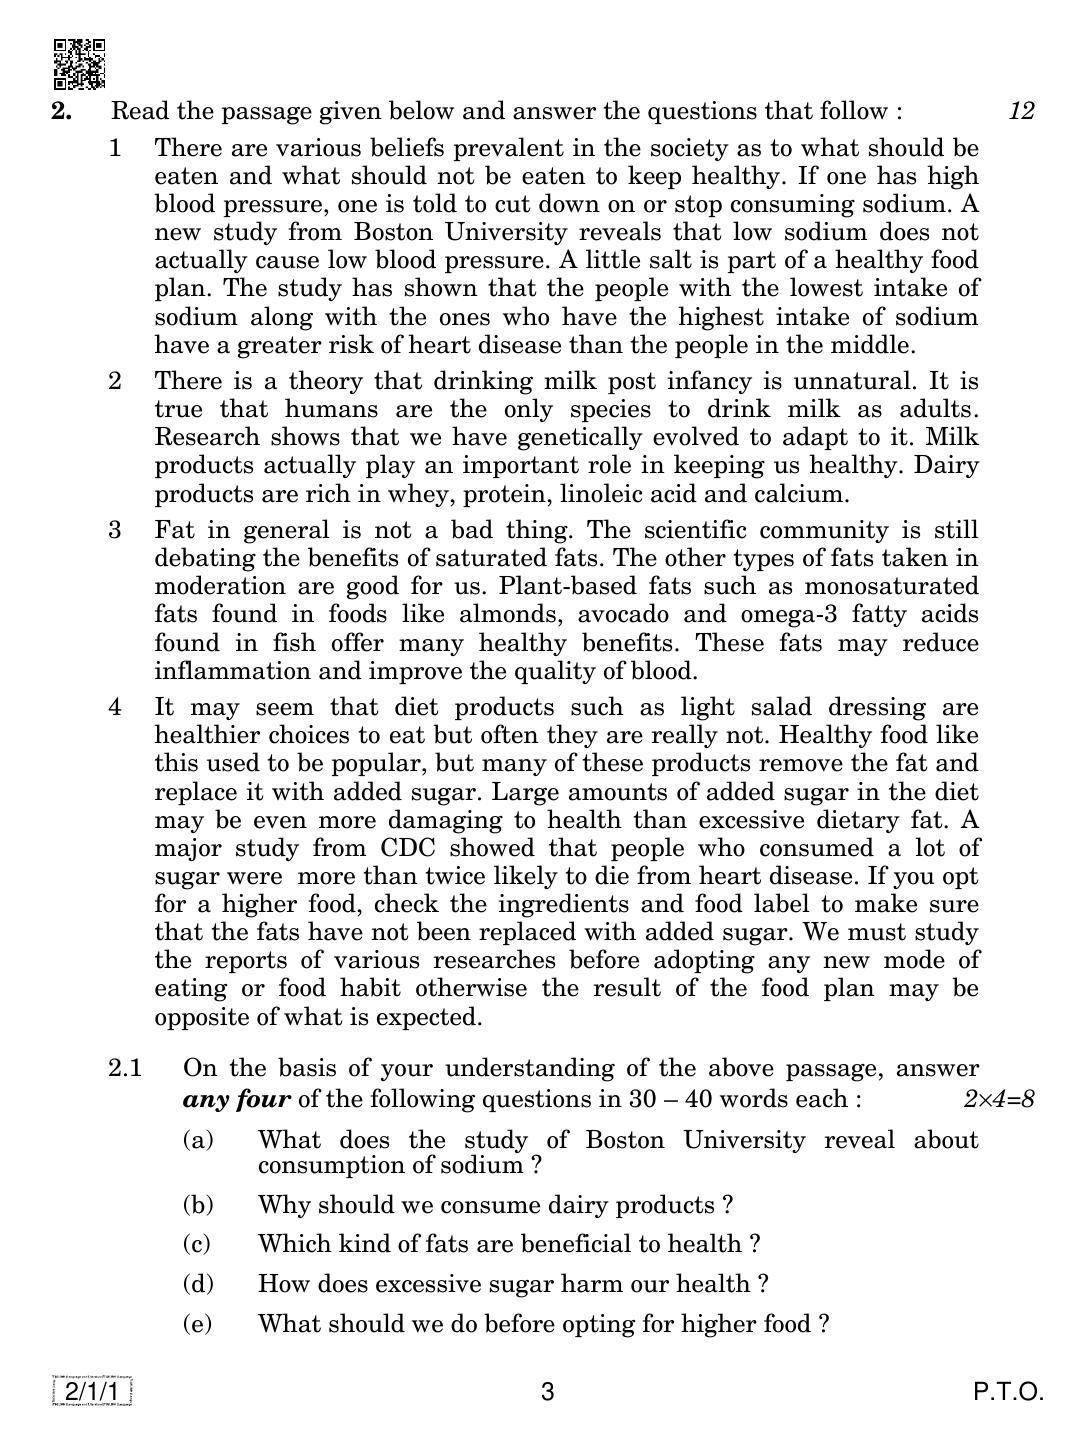 CBSE Class 10 2-1-1 ENGLISH LANG. & LIT. 2019 Compartment Question Paper - Page 3